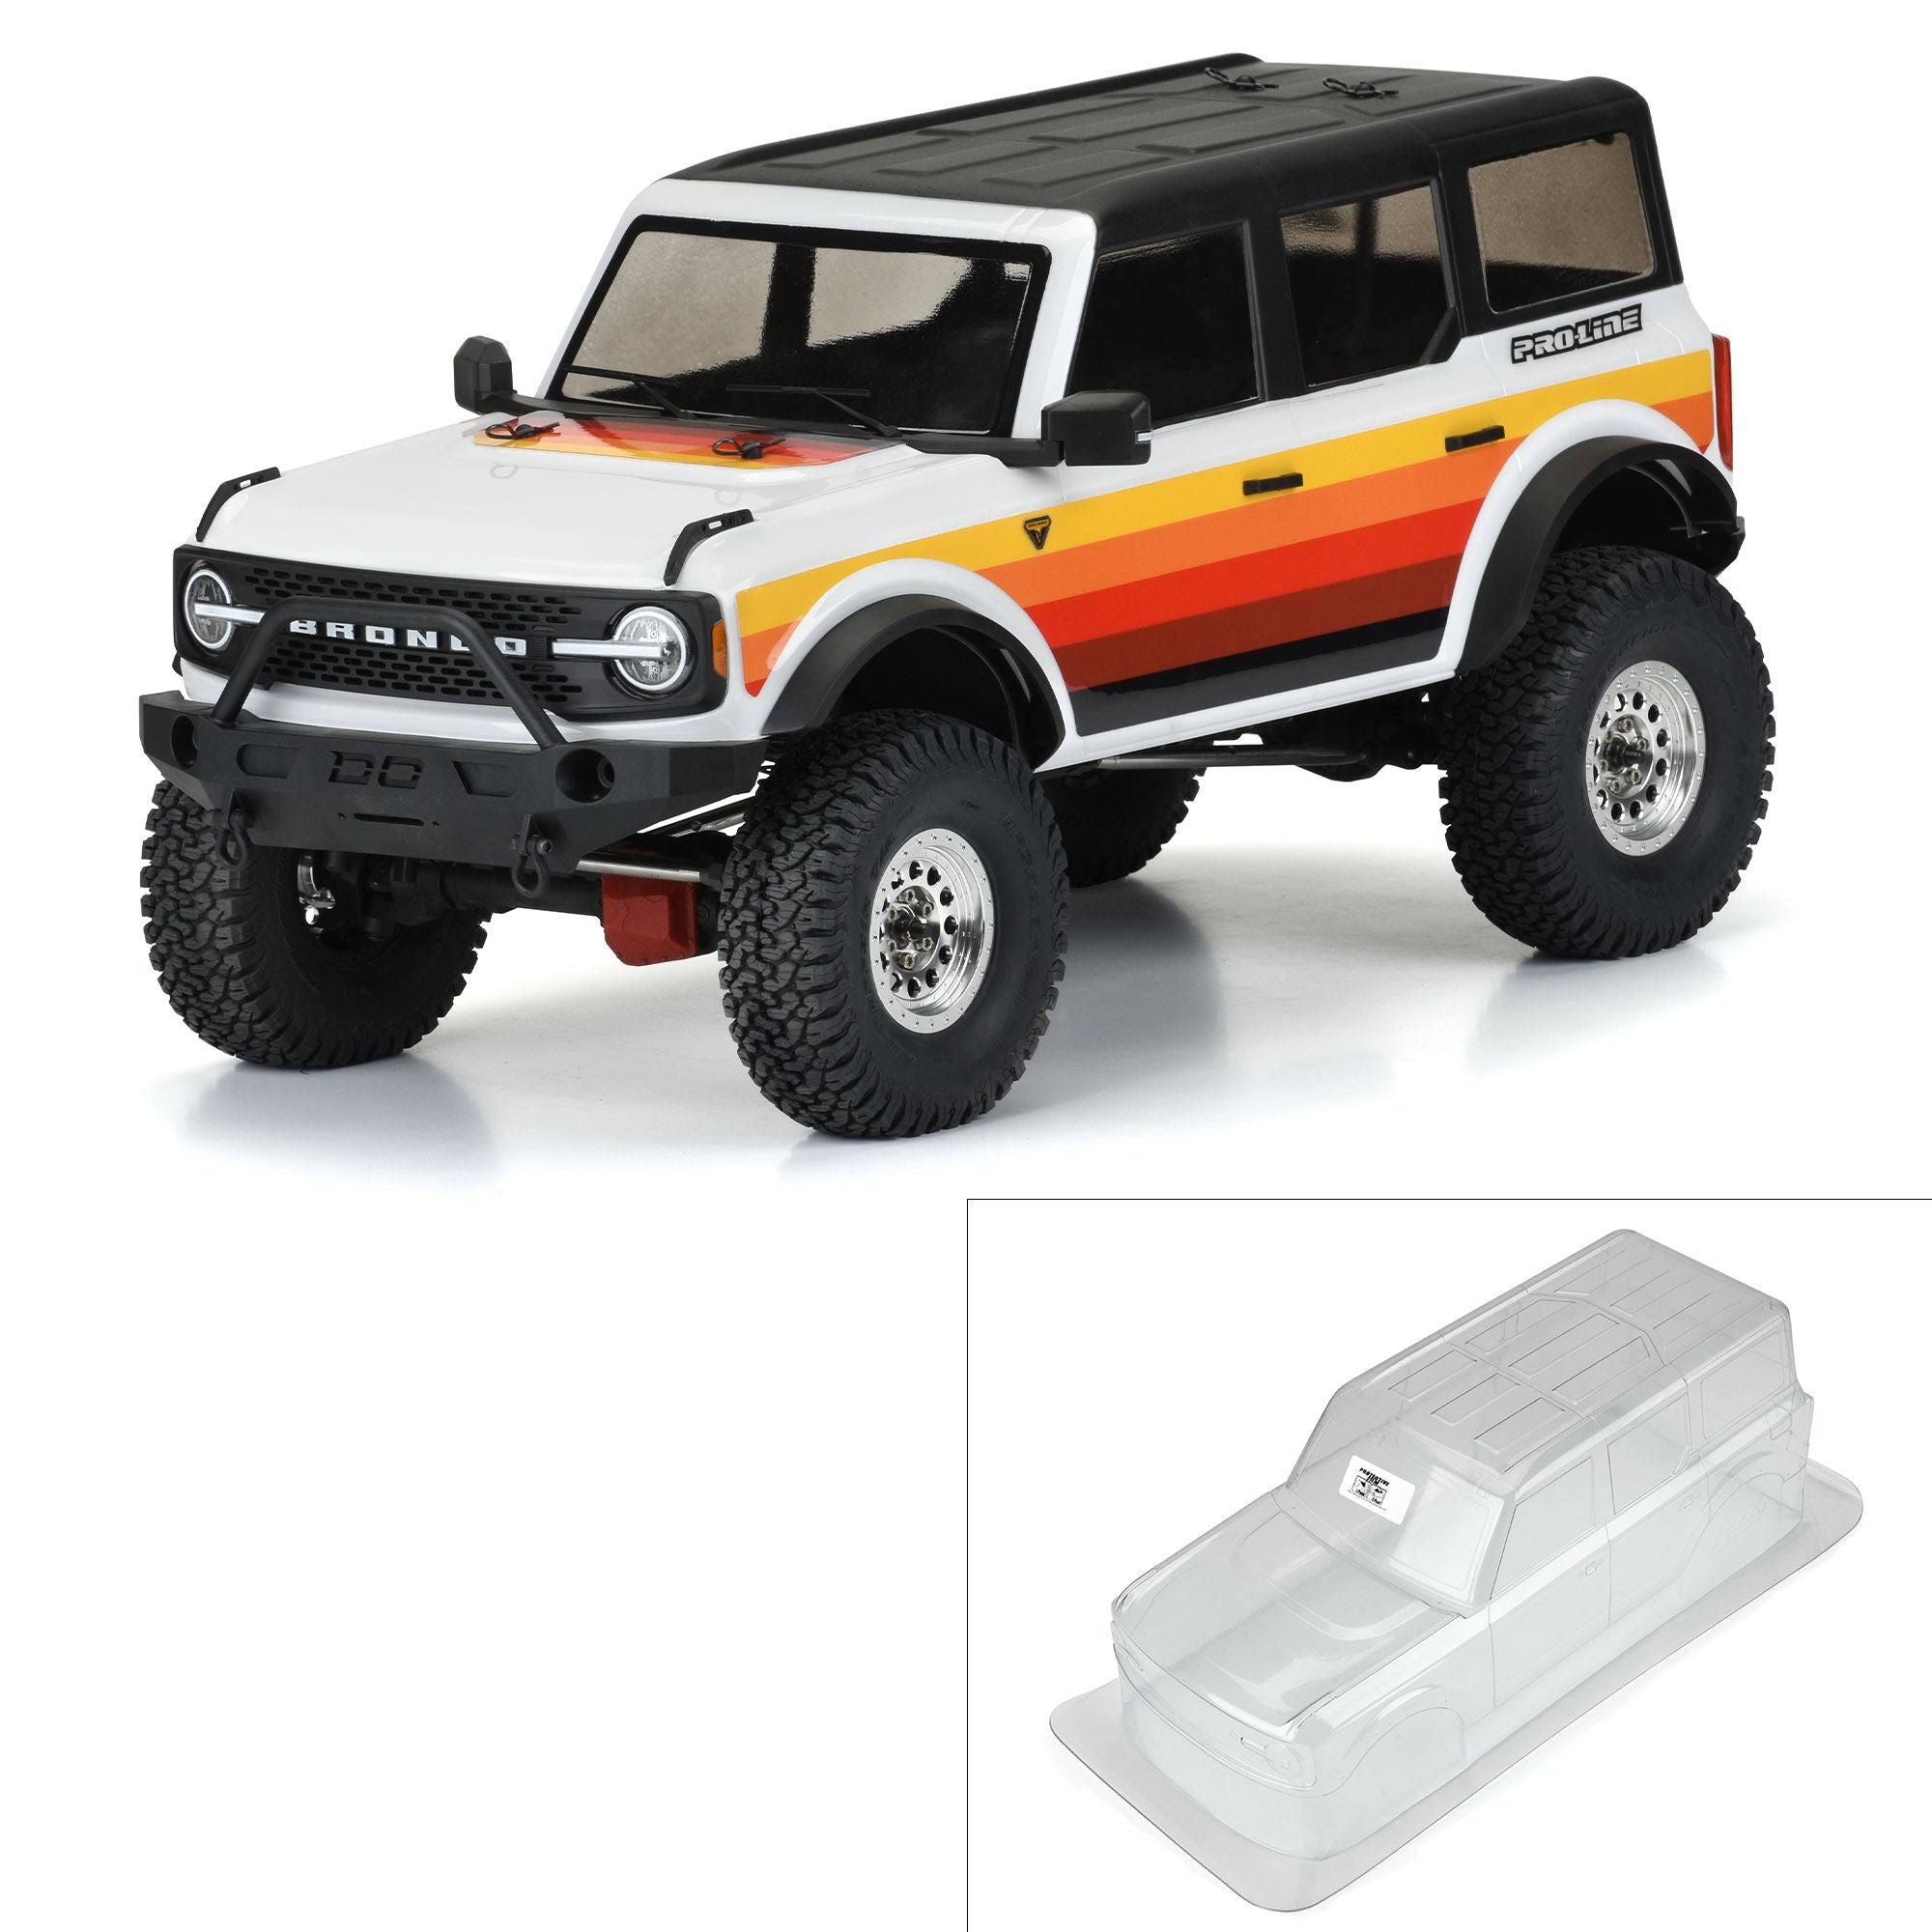 Proline Racing PRO 357000 Pro-Line 2021 Ford Bronco Clear Body 12.3" Crawlers